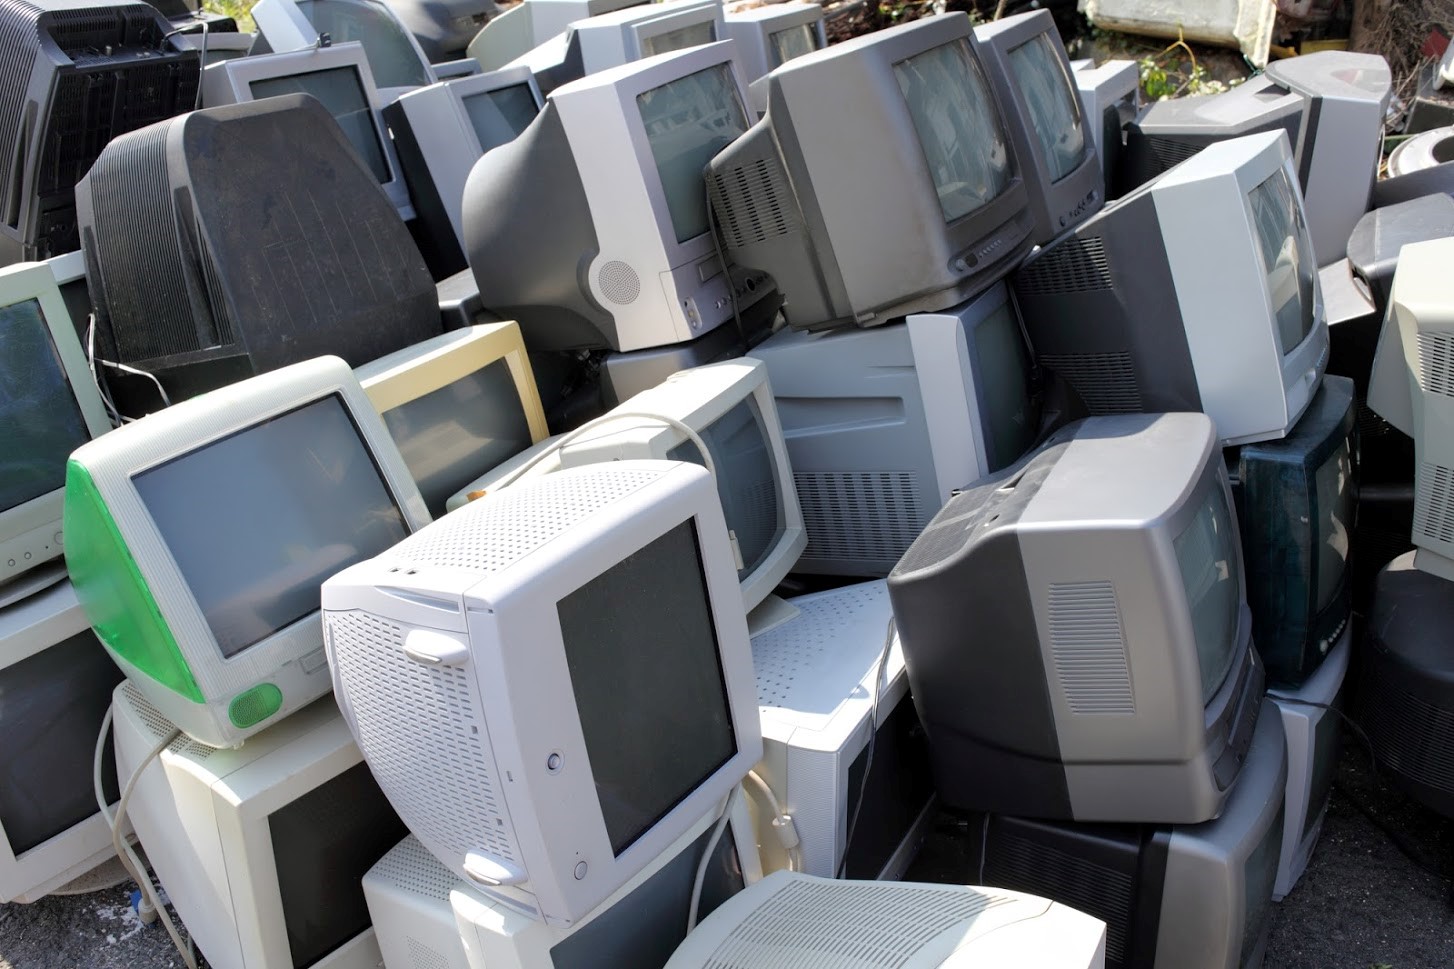 computers stacked and ready to be recycled